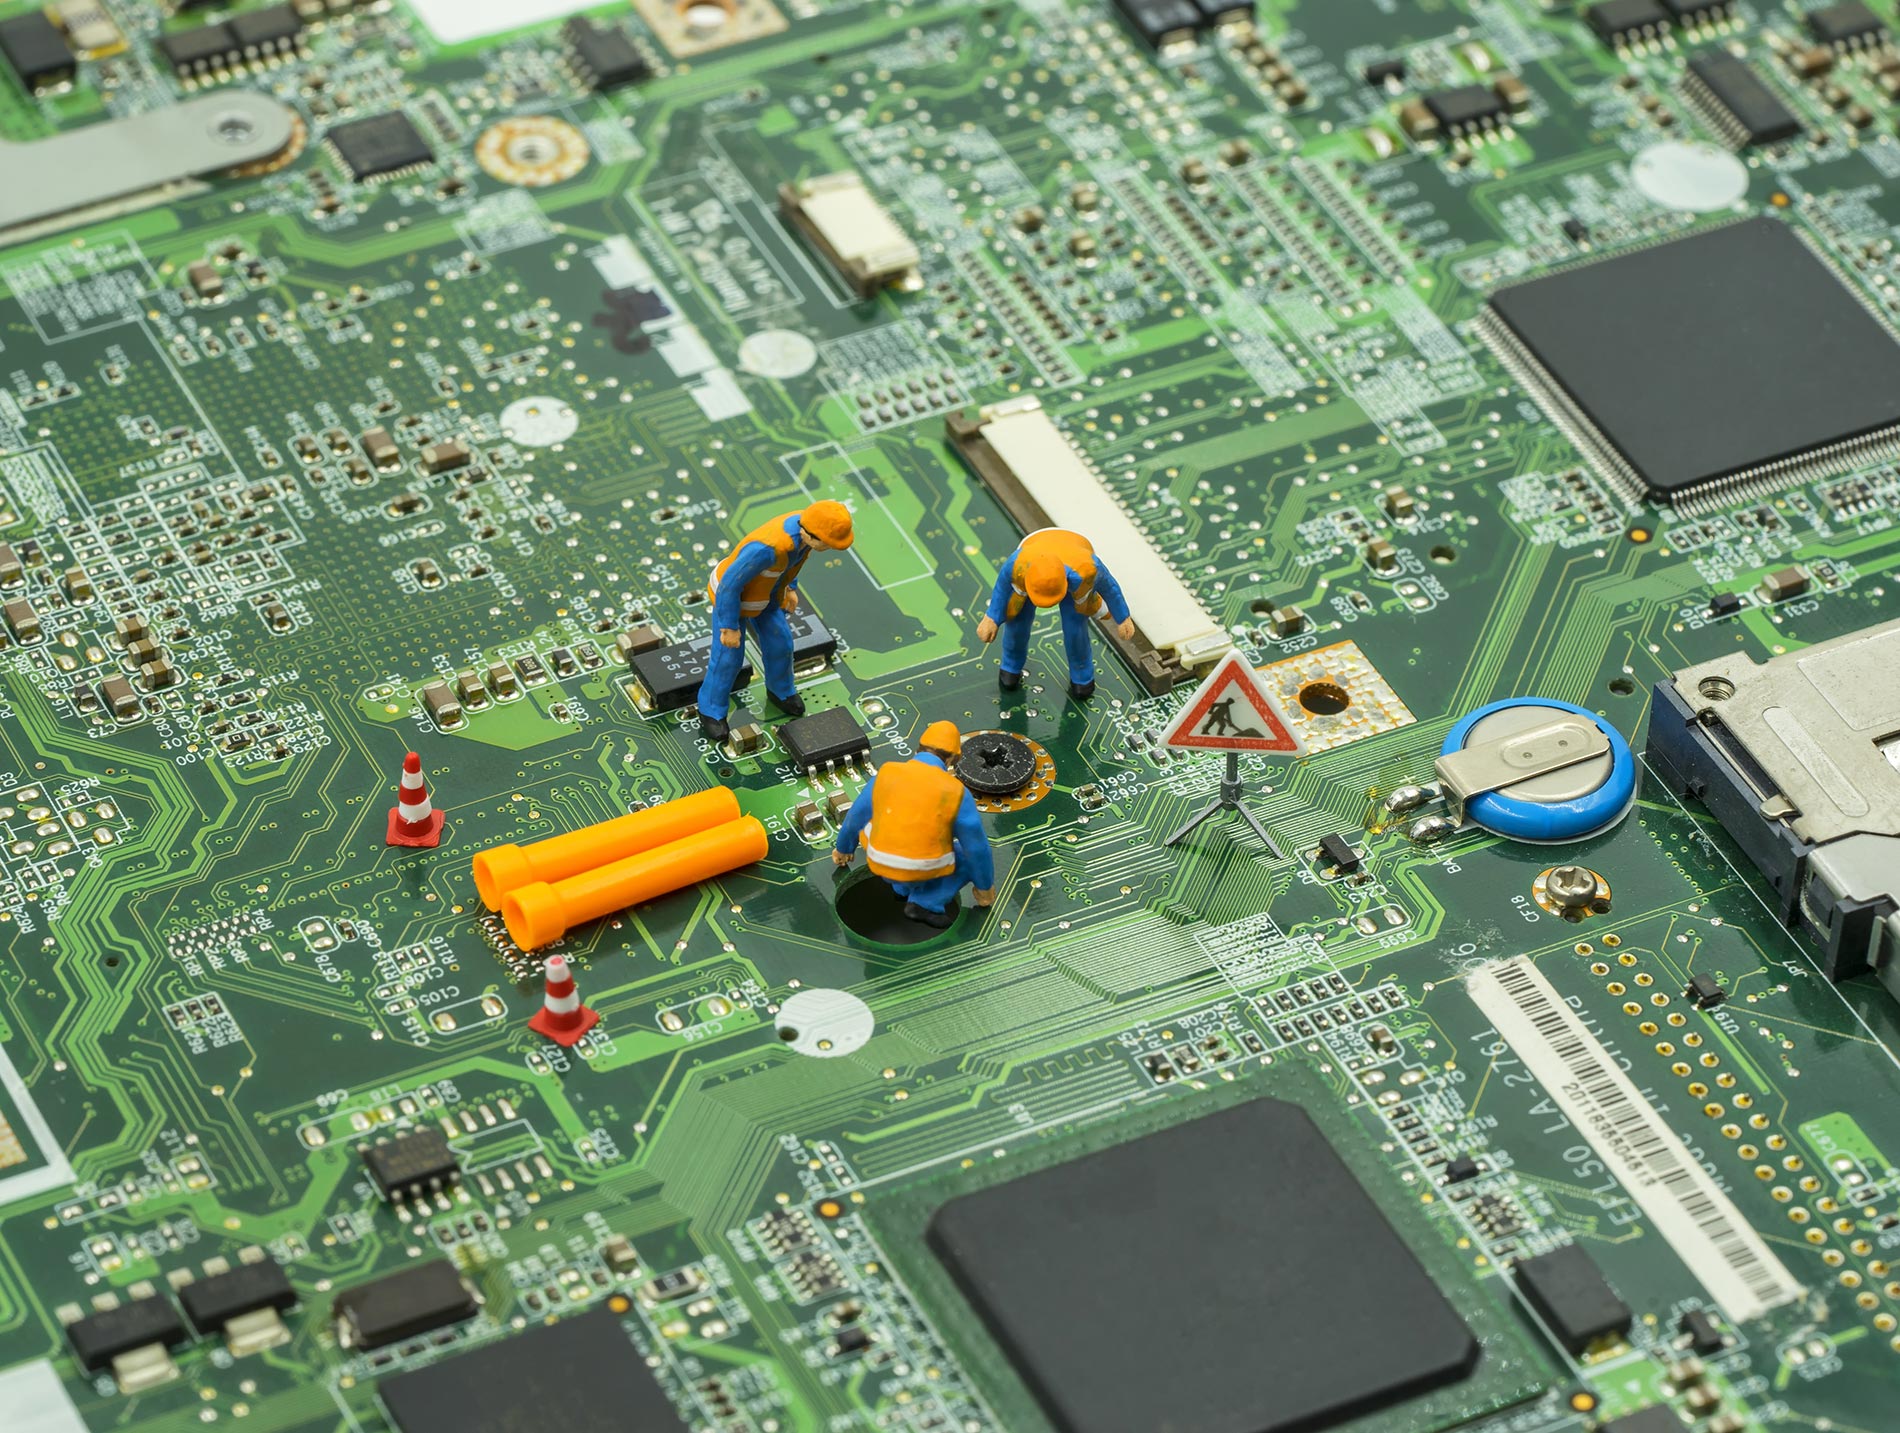 a close up of a computer motherboard with some tools on it